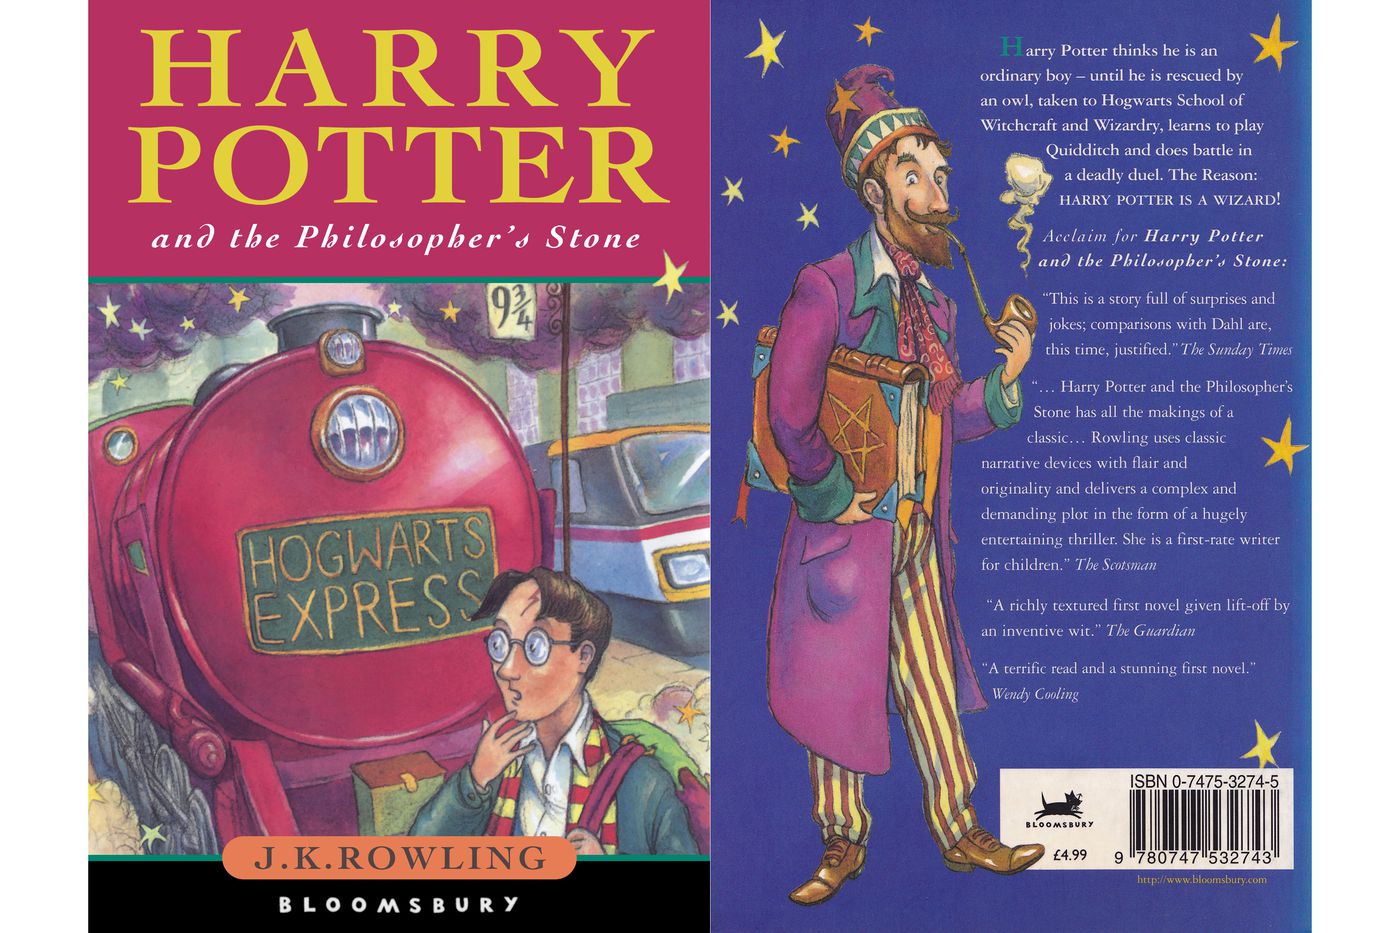 First edition Harry Potter book sells for $90,000, typos and all - The Verge